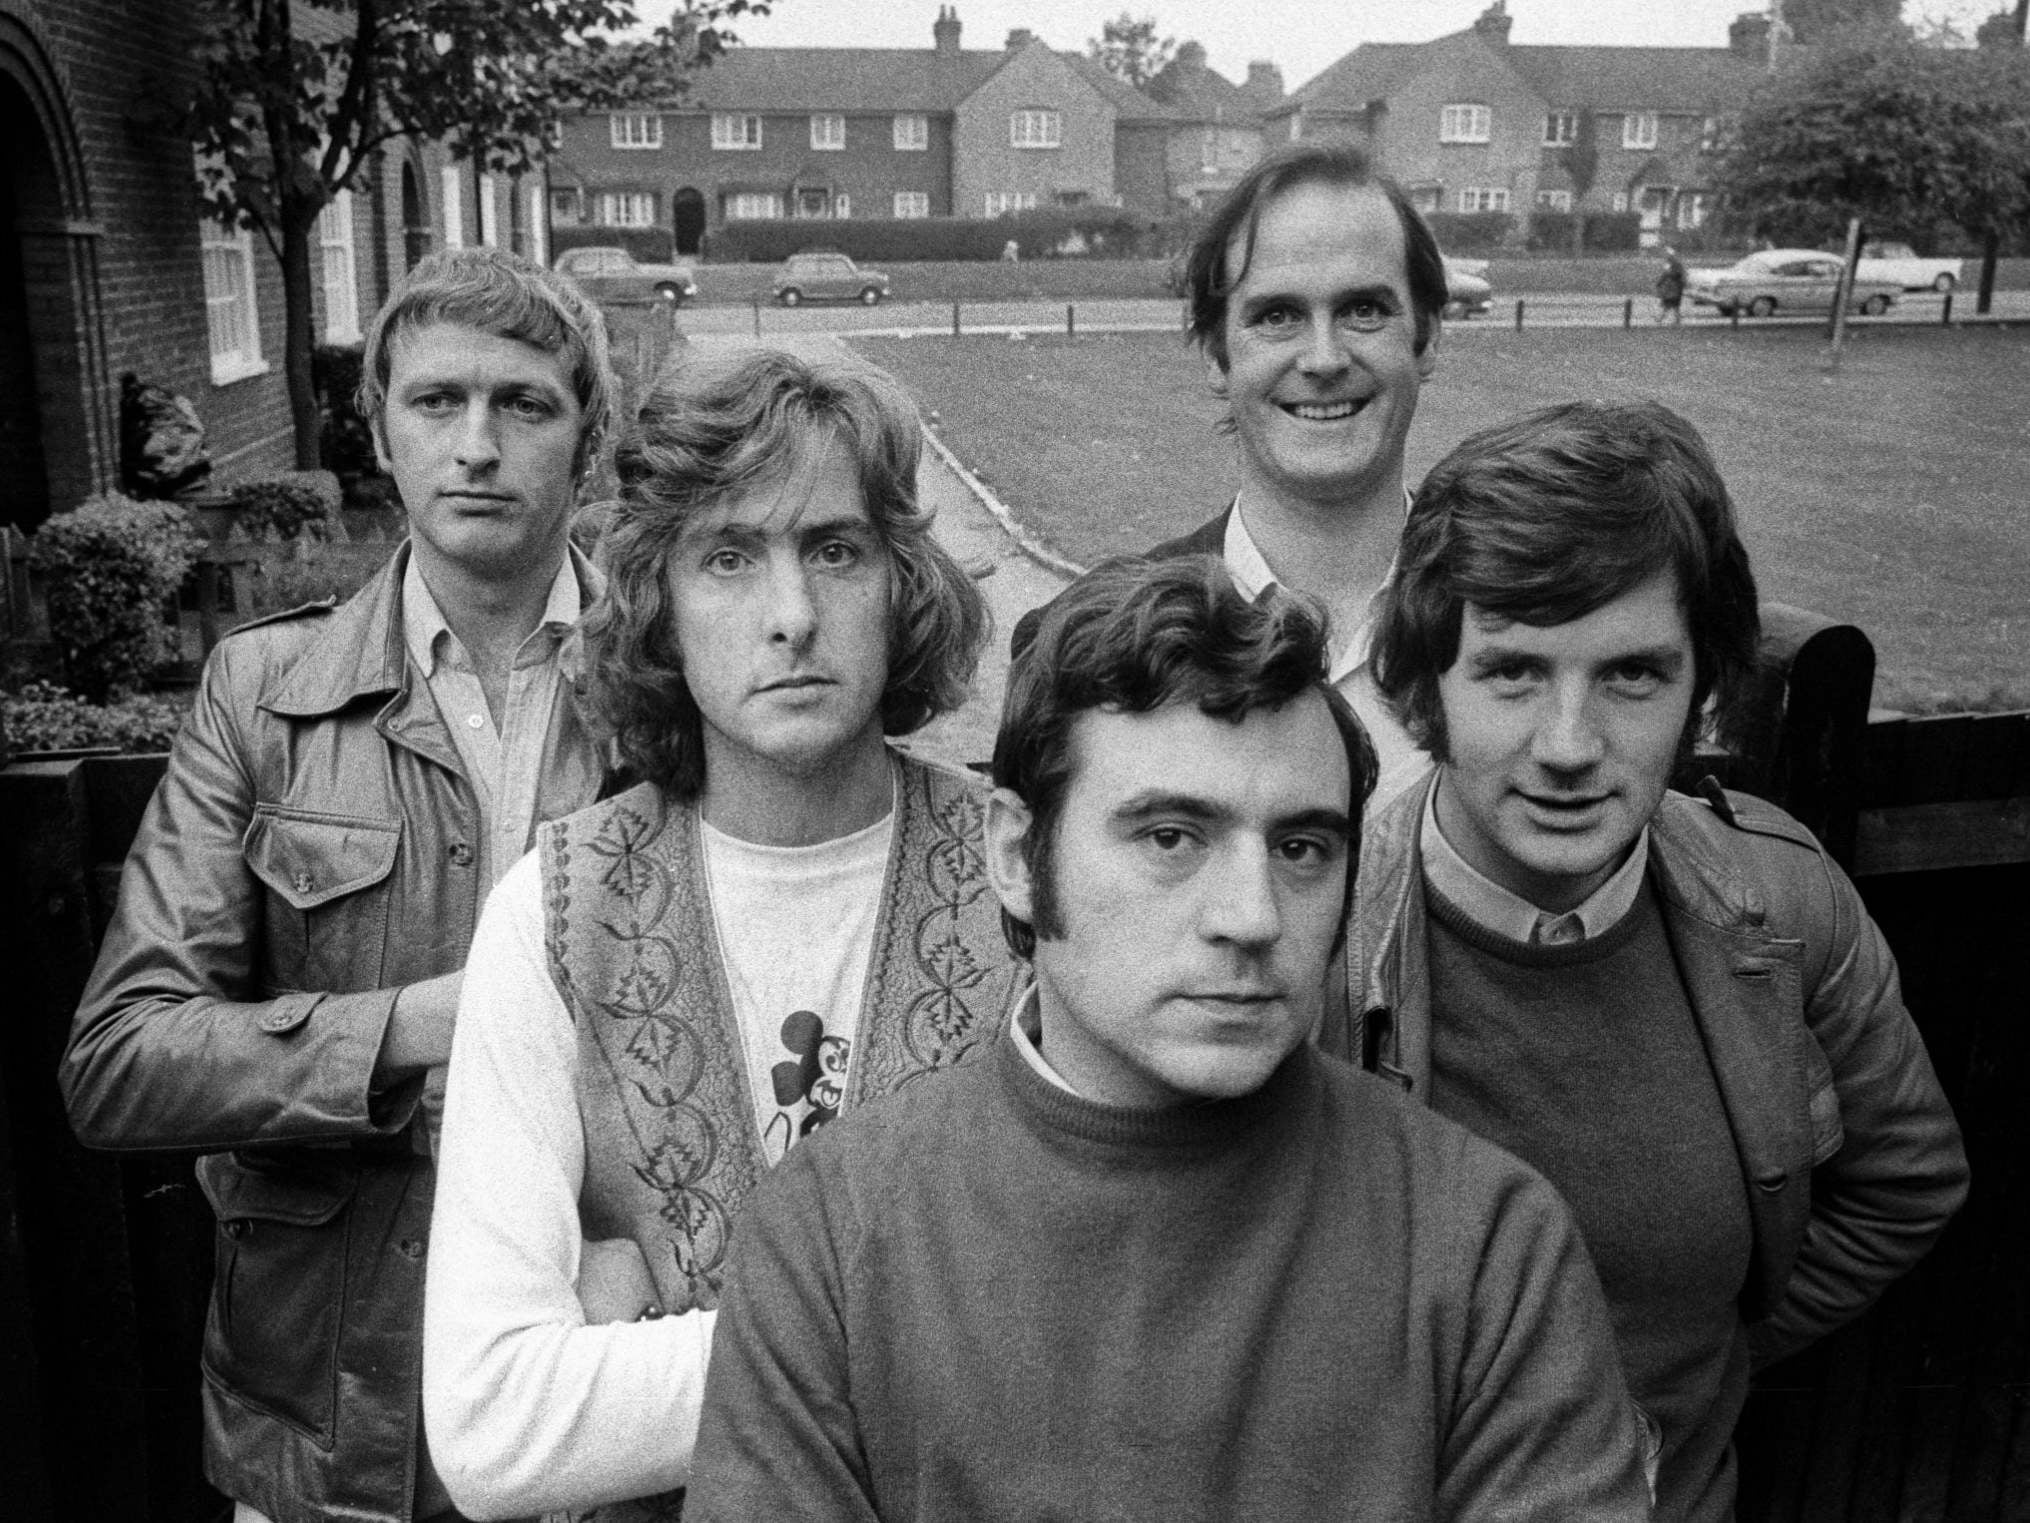 The Pythons in 1970: Chapman, Idle, Jones, Palin and Cleese